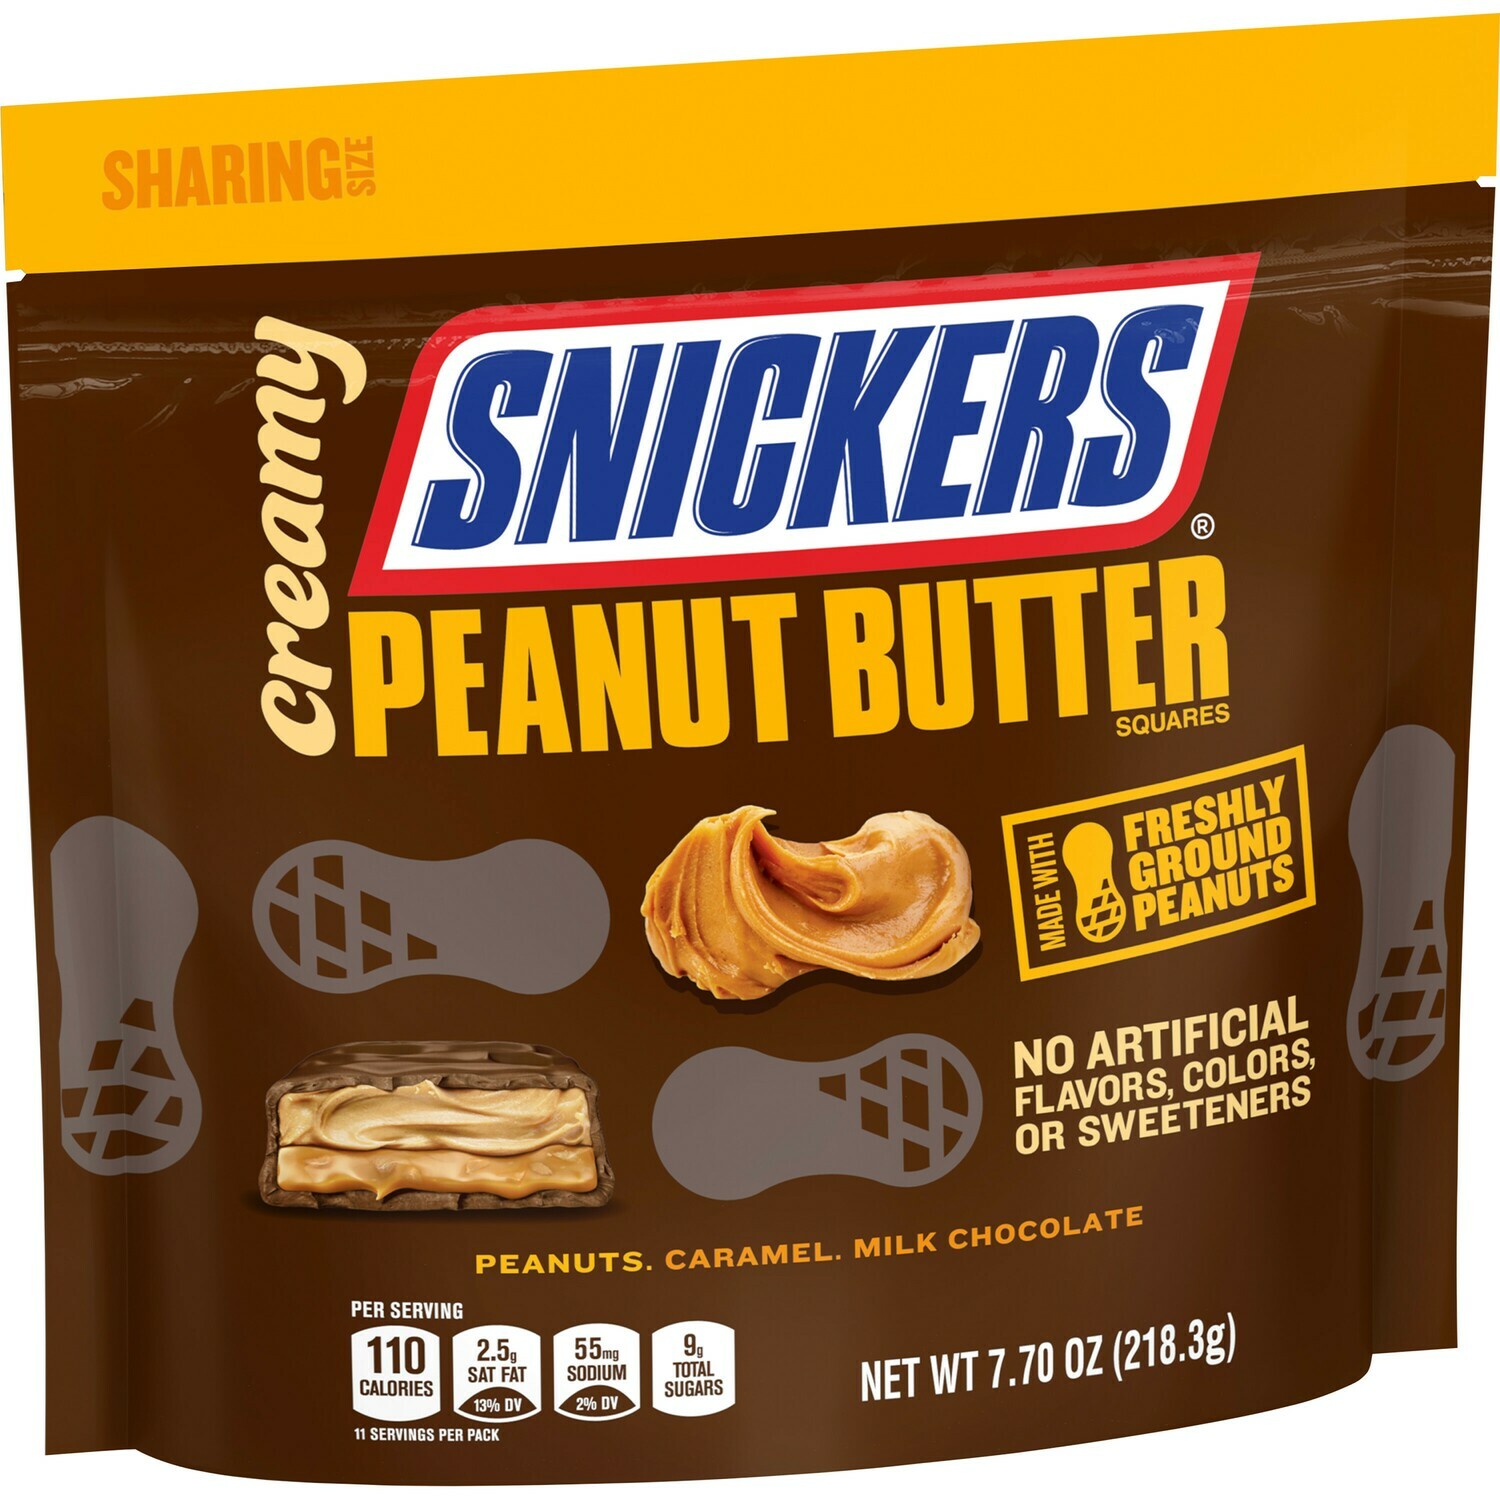 Share Pack Snickers Creamy Peanut Butter